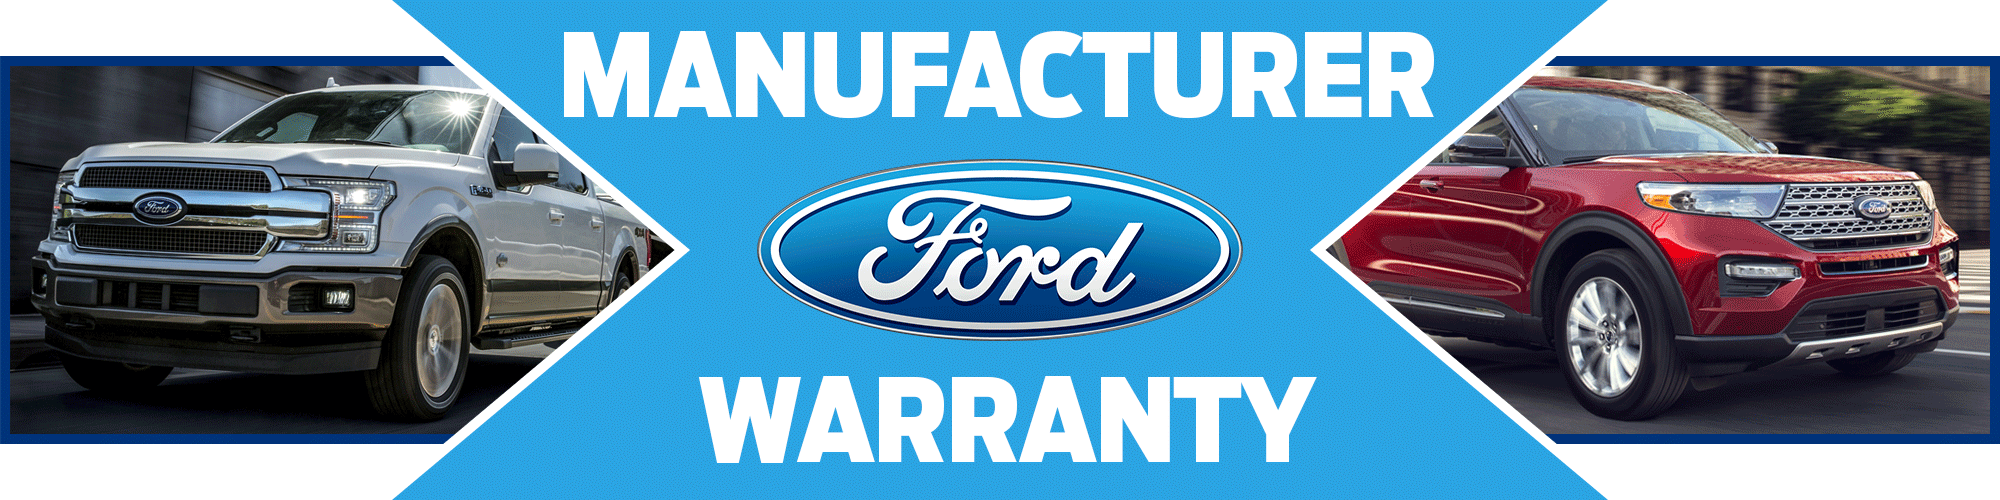 Ford Manufacturer Warranty | What Does It Cover?